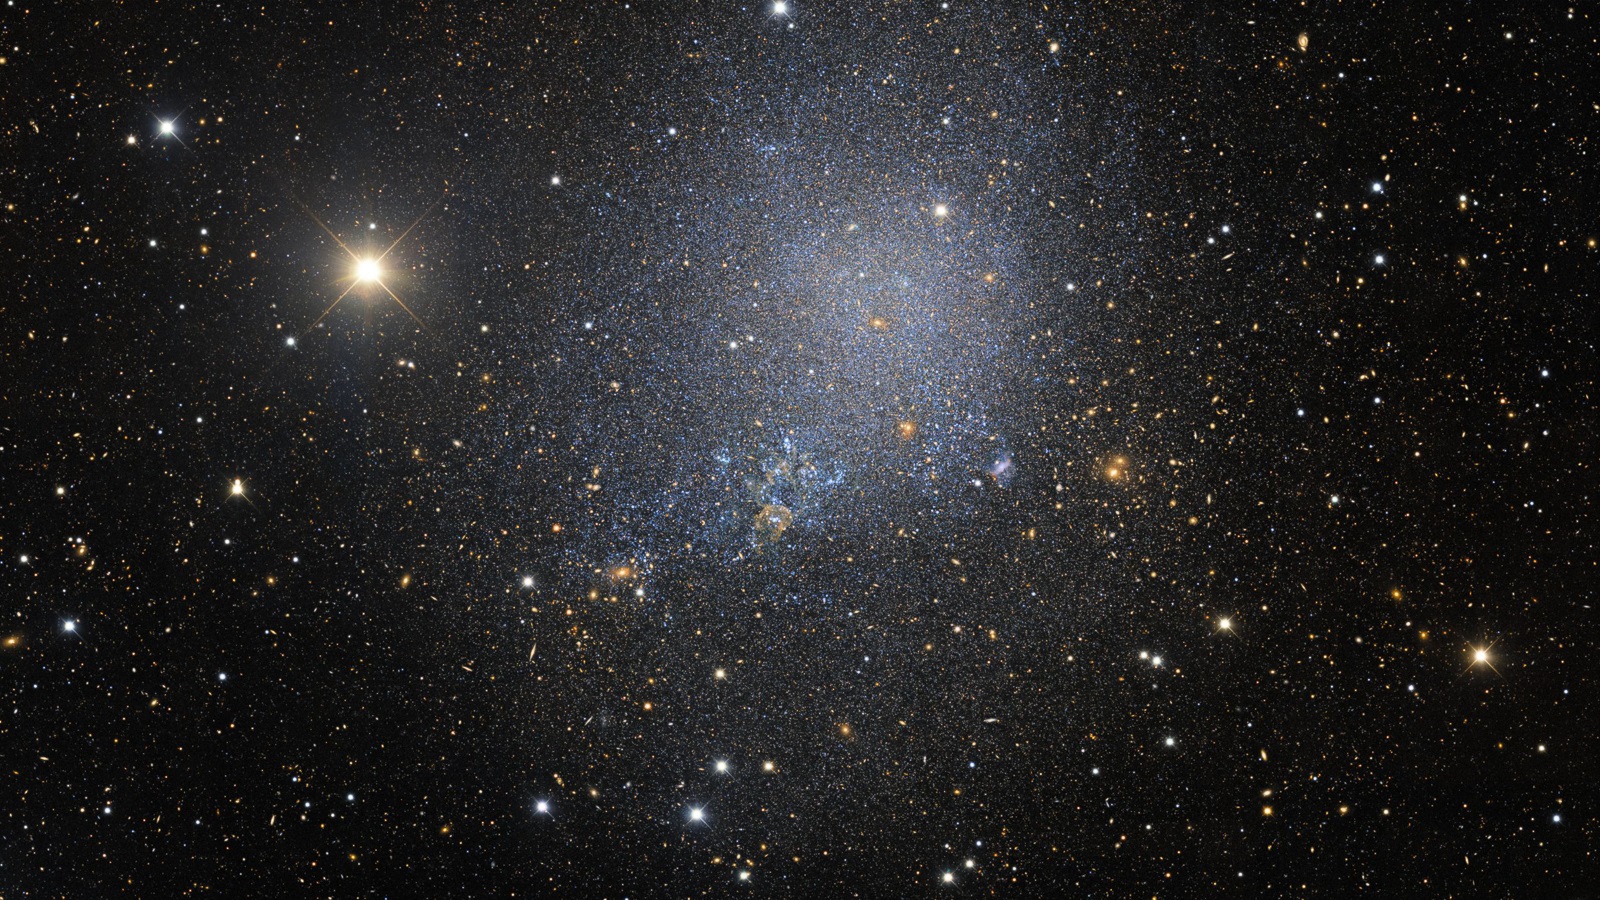 This irregular dwarf galaxy, named IC 1613, contains 100 million stars. It is a member of our Local Group of galaxy neighbors, a collection which includes our Milky Way. (Image by the Dark Energy Survey team.)